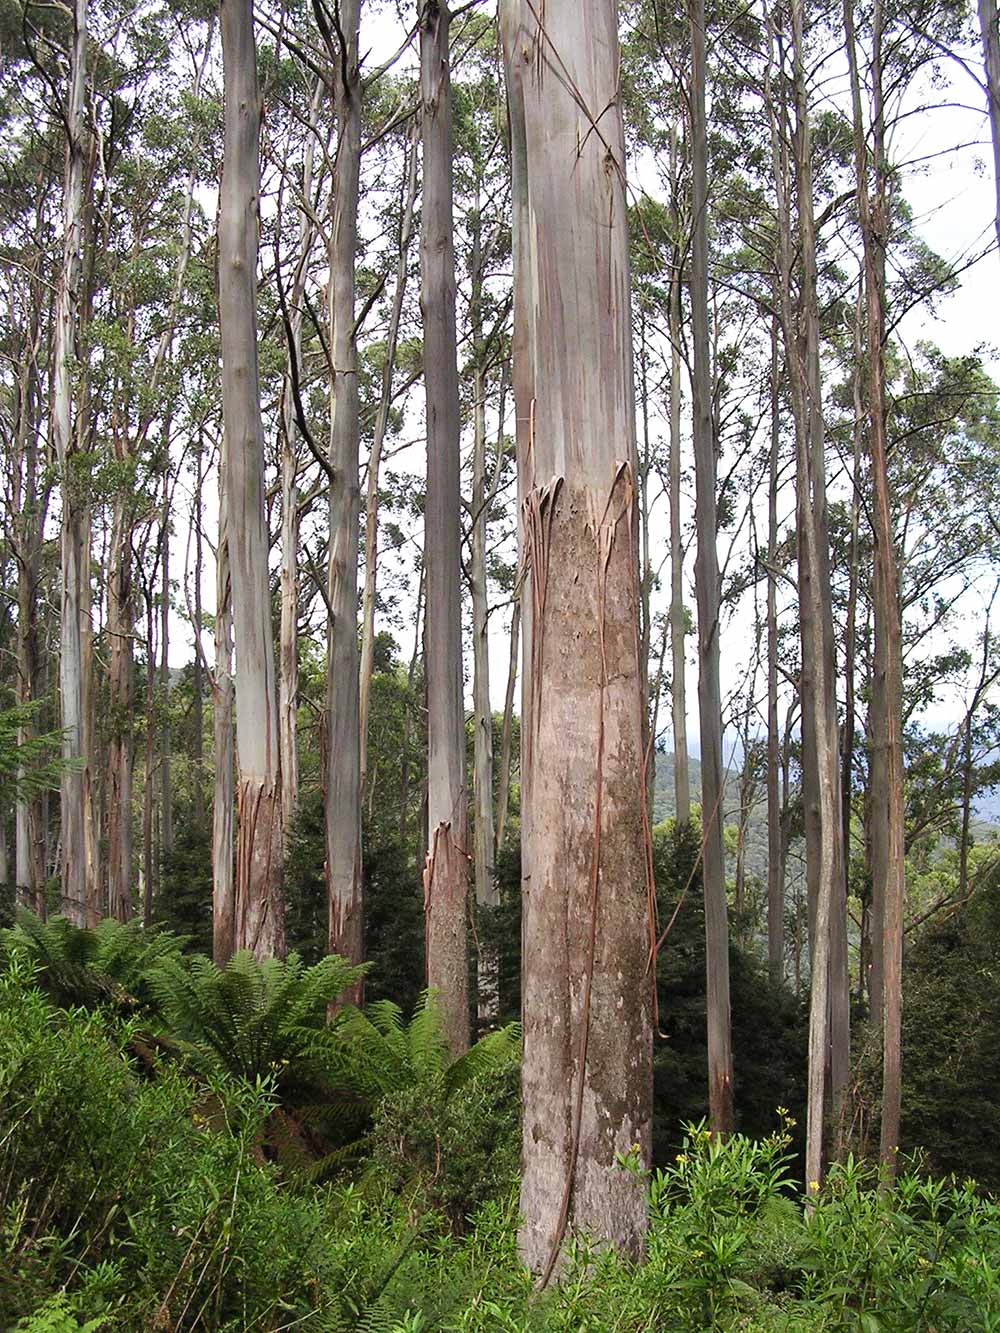 Tall straight trunks of Mountain Ash